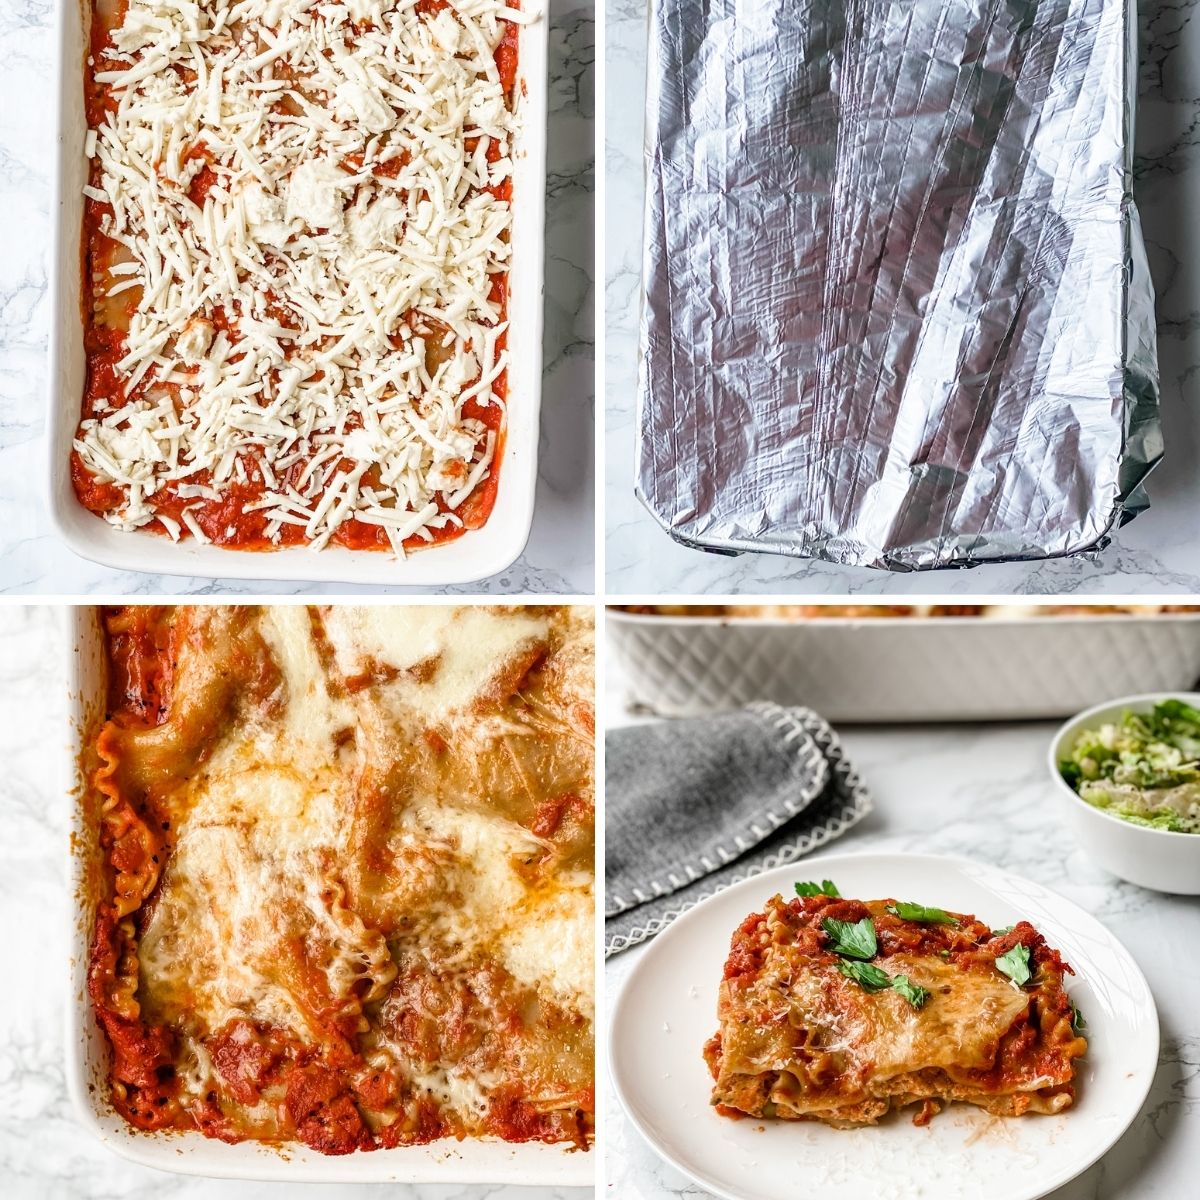 the last collage showing how to make gluten free lasagna.